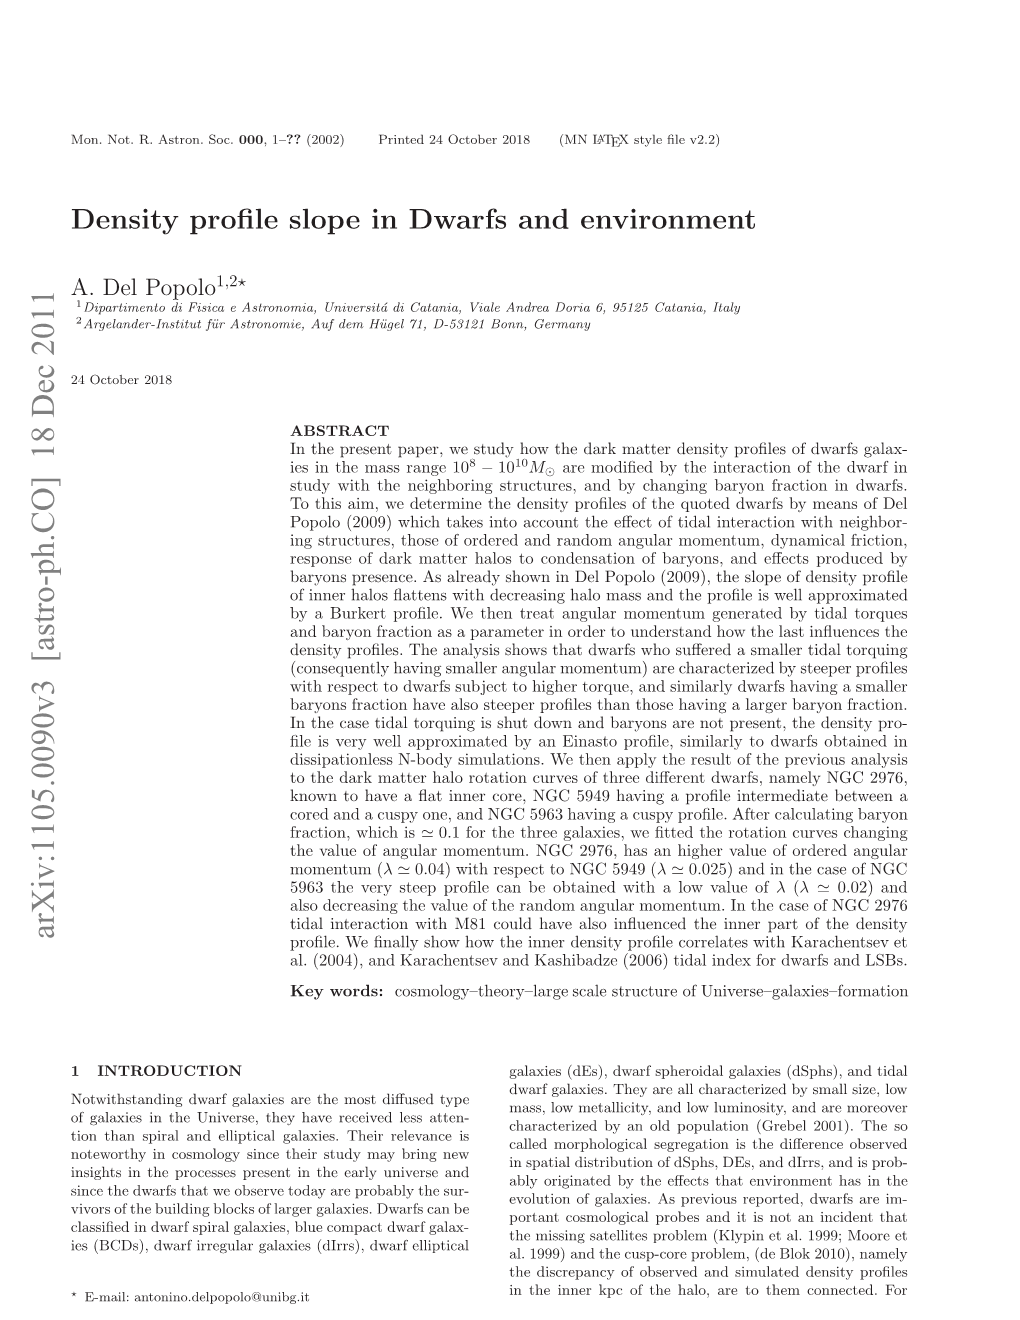 Density Profile Slope in Dwarfs and Environment